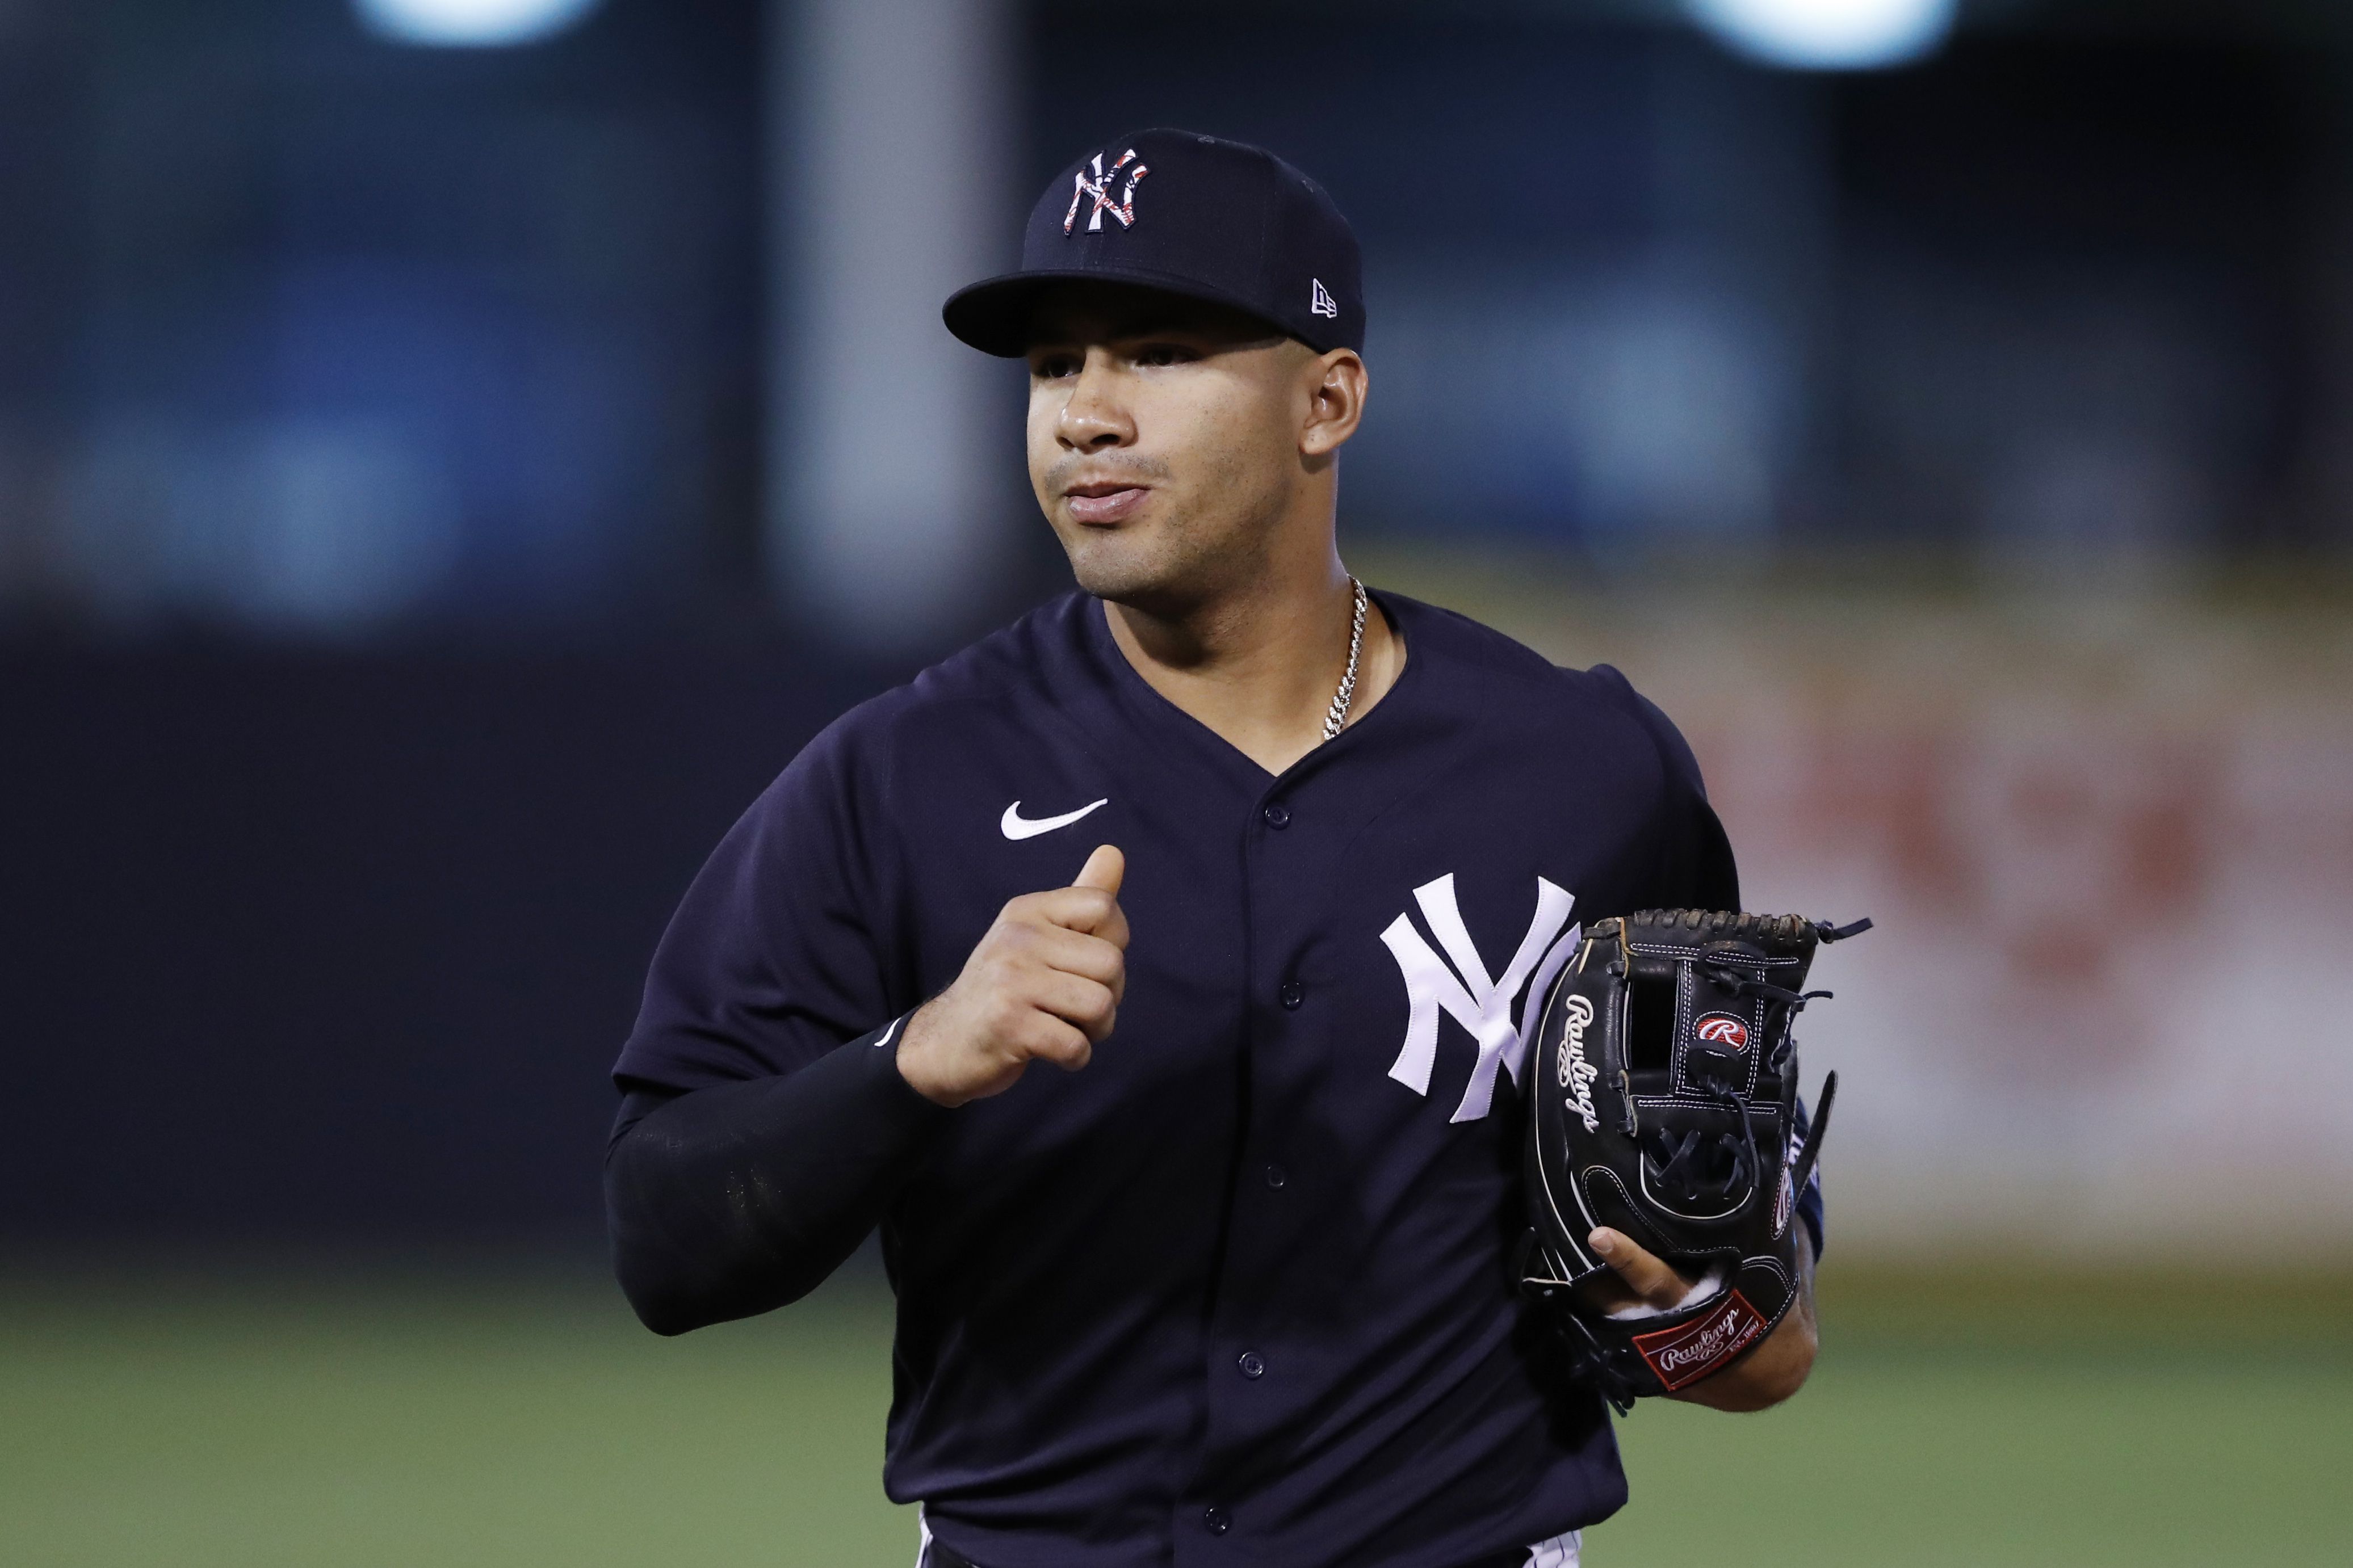 Yankees' Gleyber Torres will be scarier once he masters the